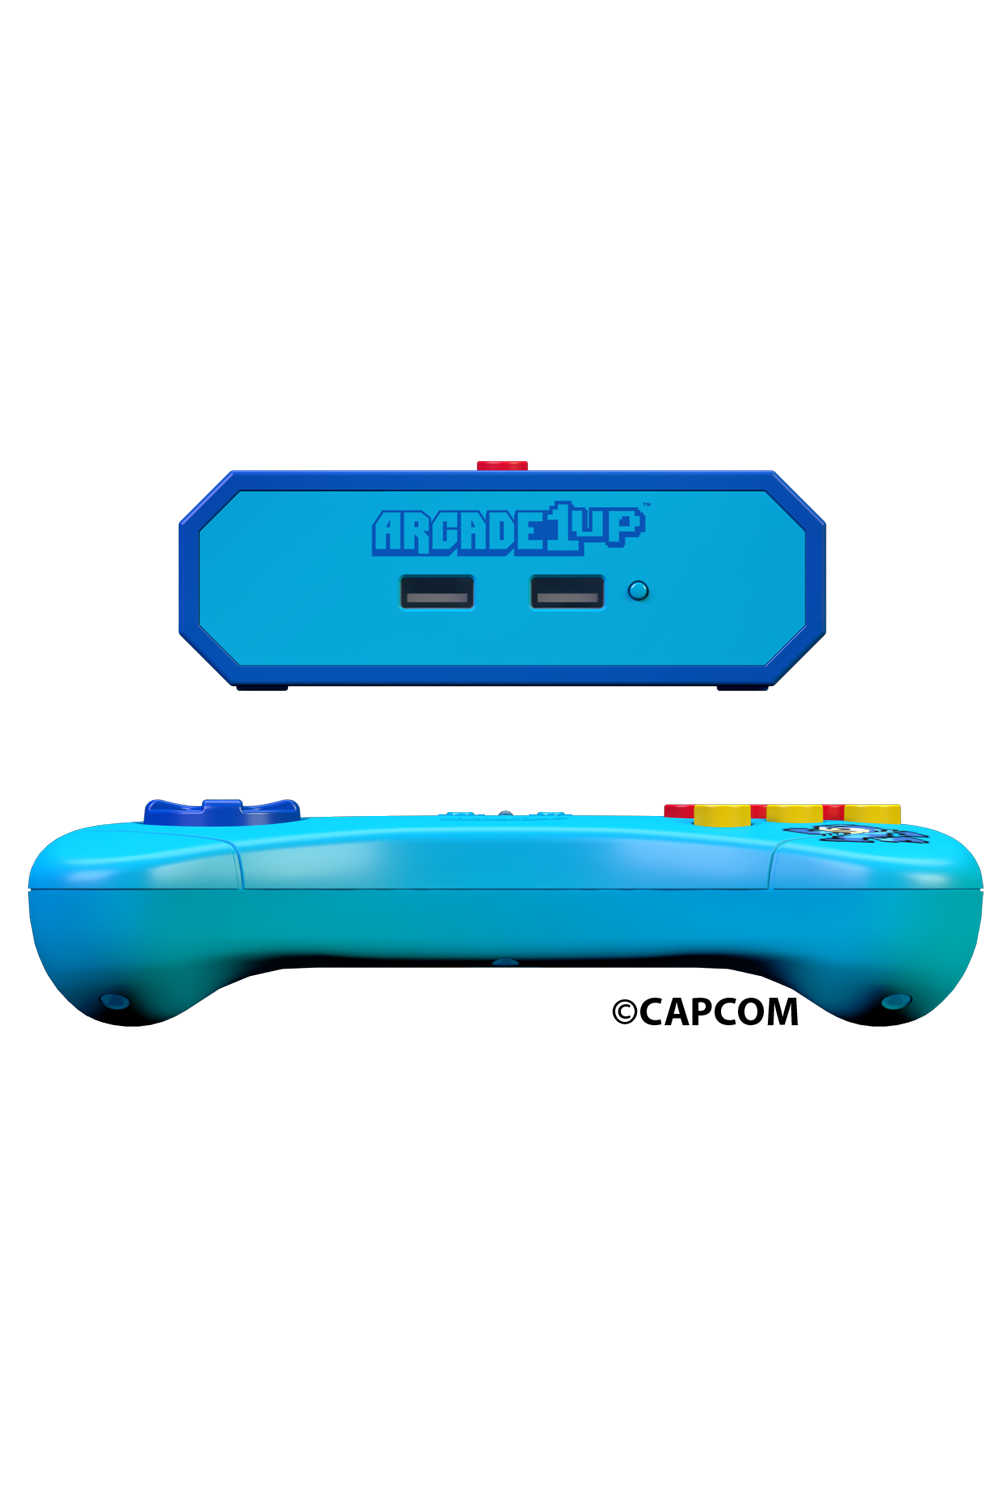 Mega Man™ HDMI Game Console with Wireless Controller